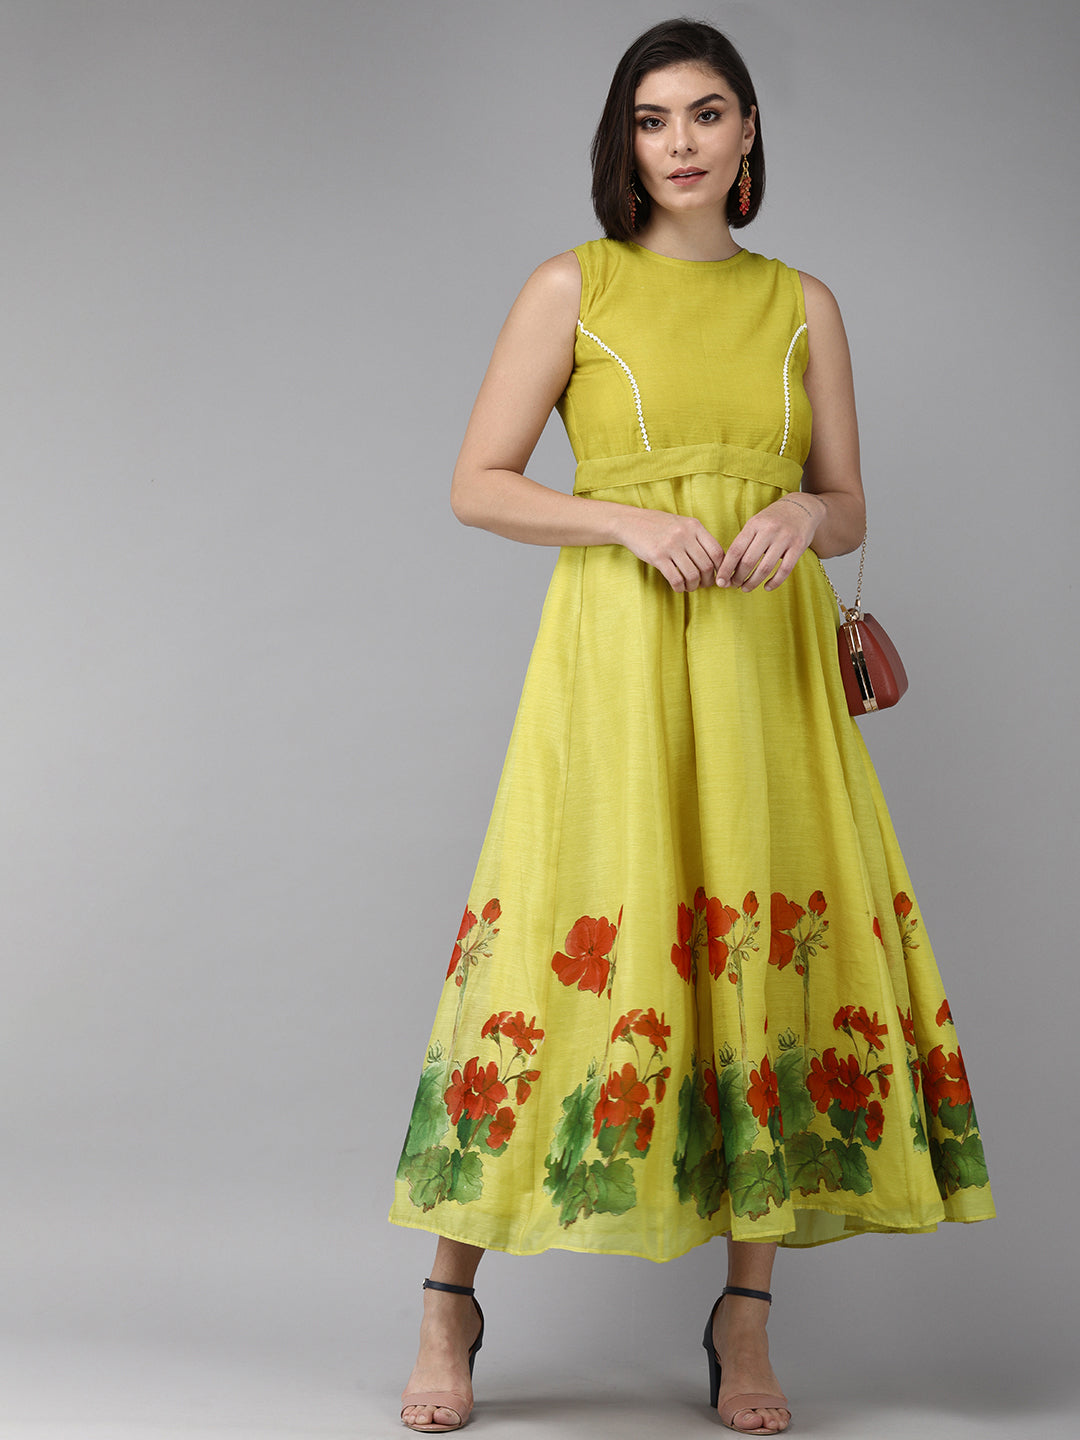 Women's Yellow Floral Chanderi Silk Maxi Dress - Bhama Couture